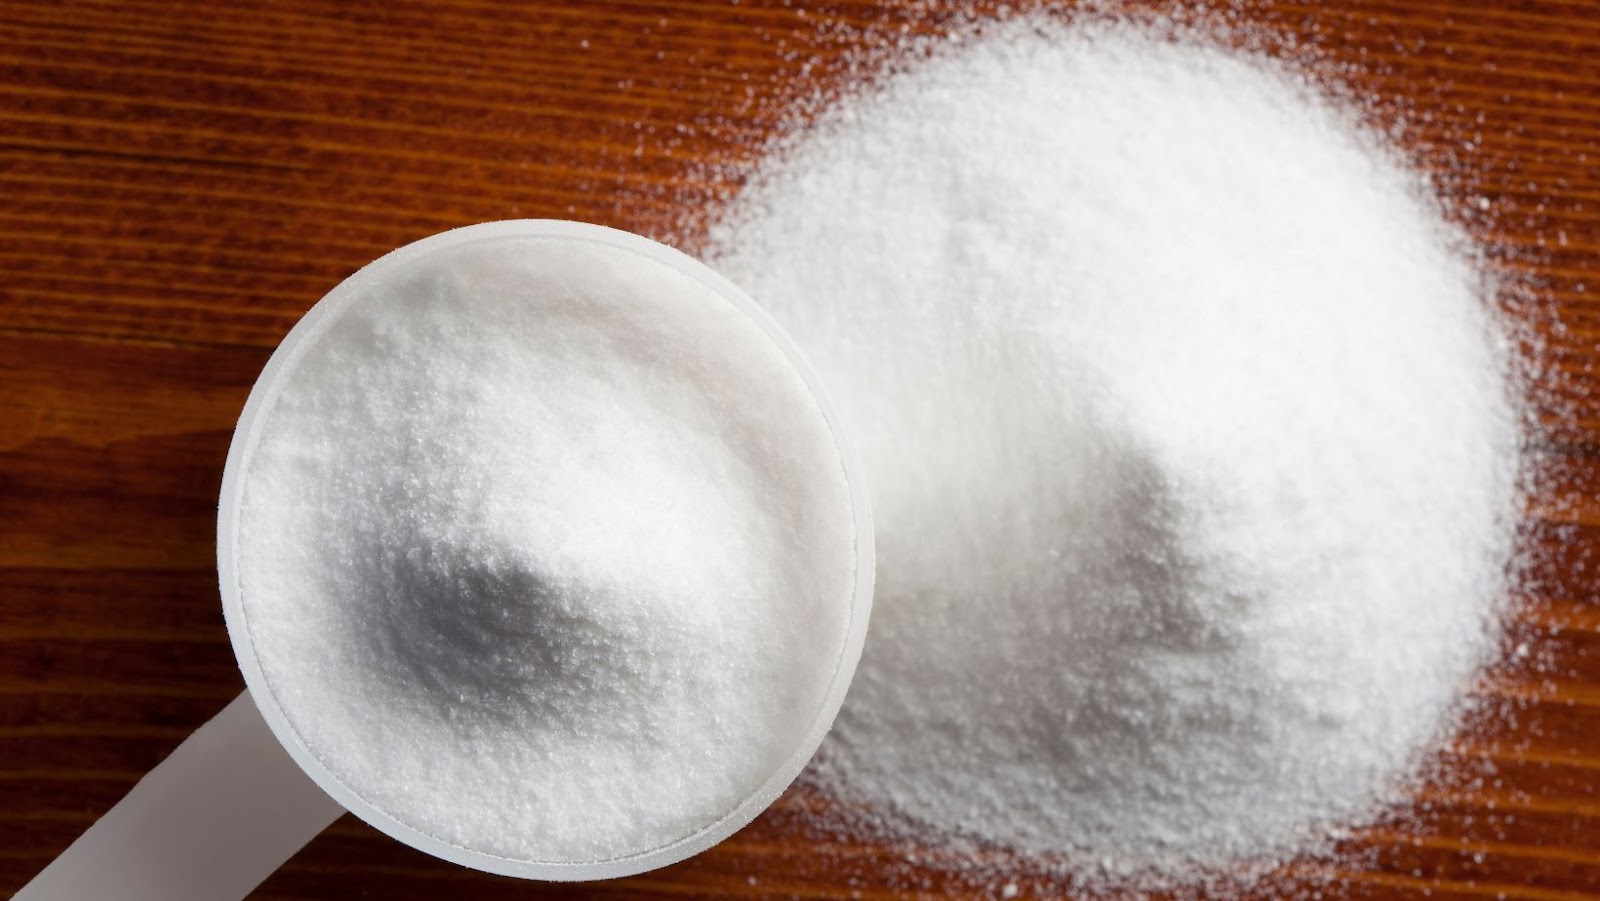 Are There Any Risks Associated With Taking Creatine?